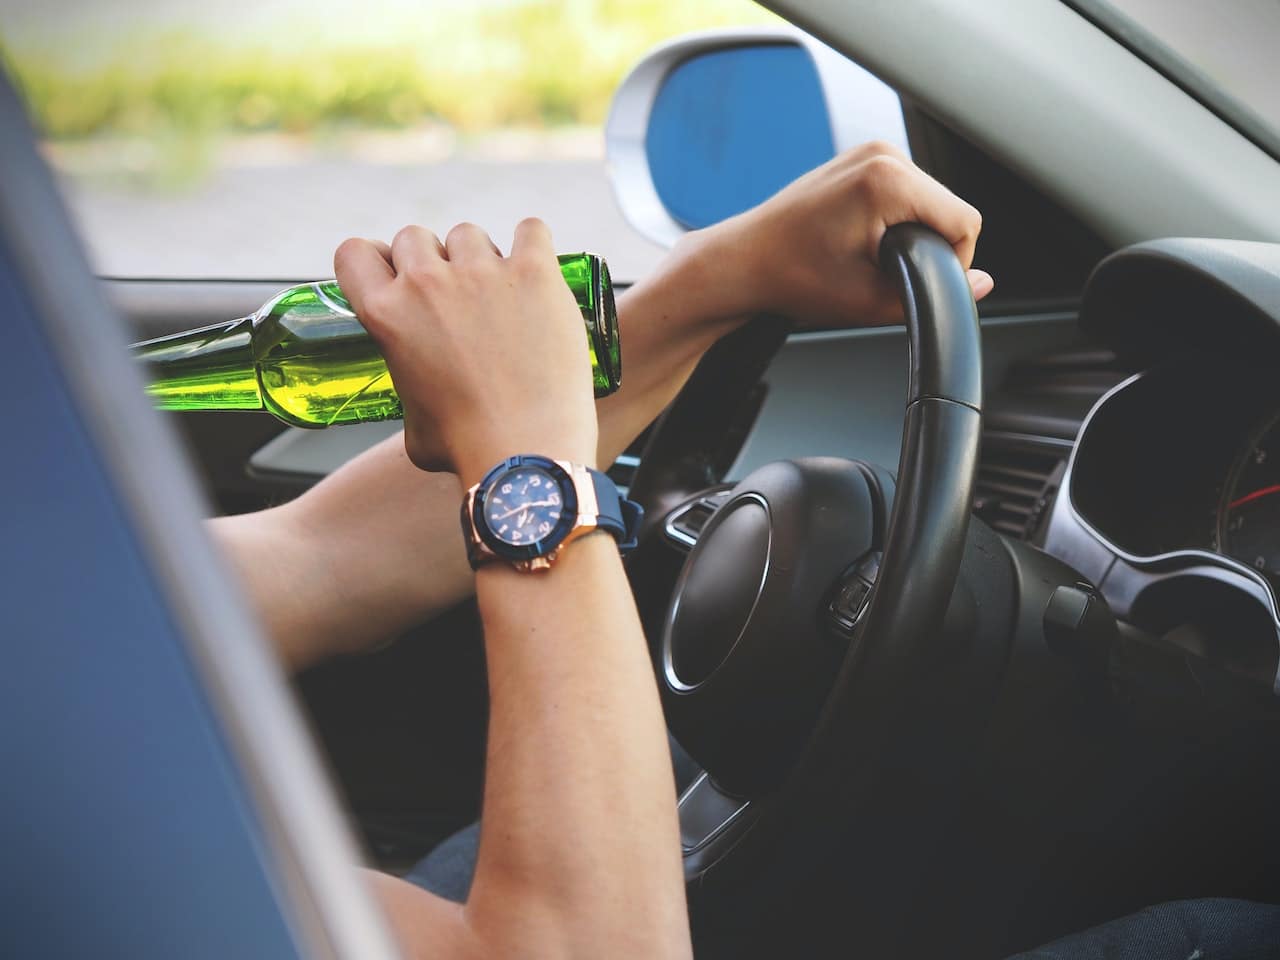 Non-invasive Blood Alcohol Content (BAC) using PPG